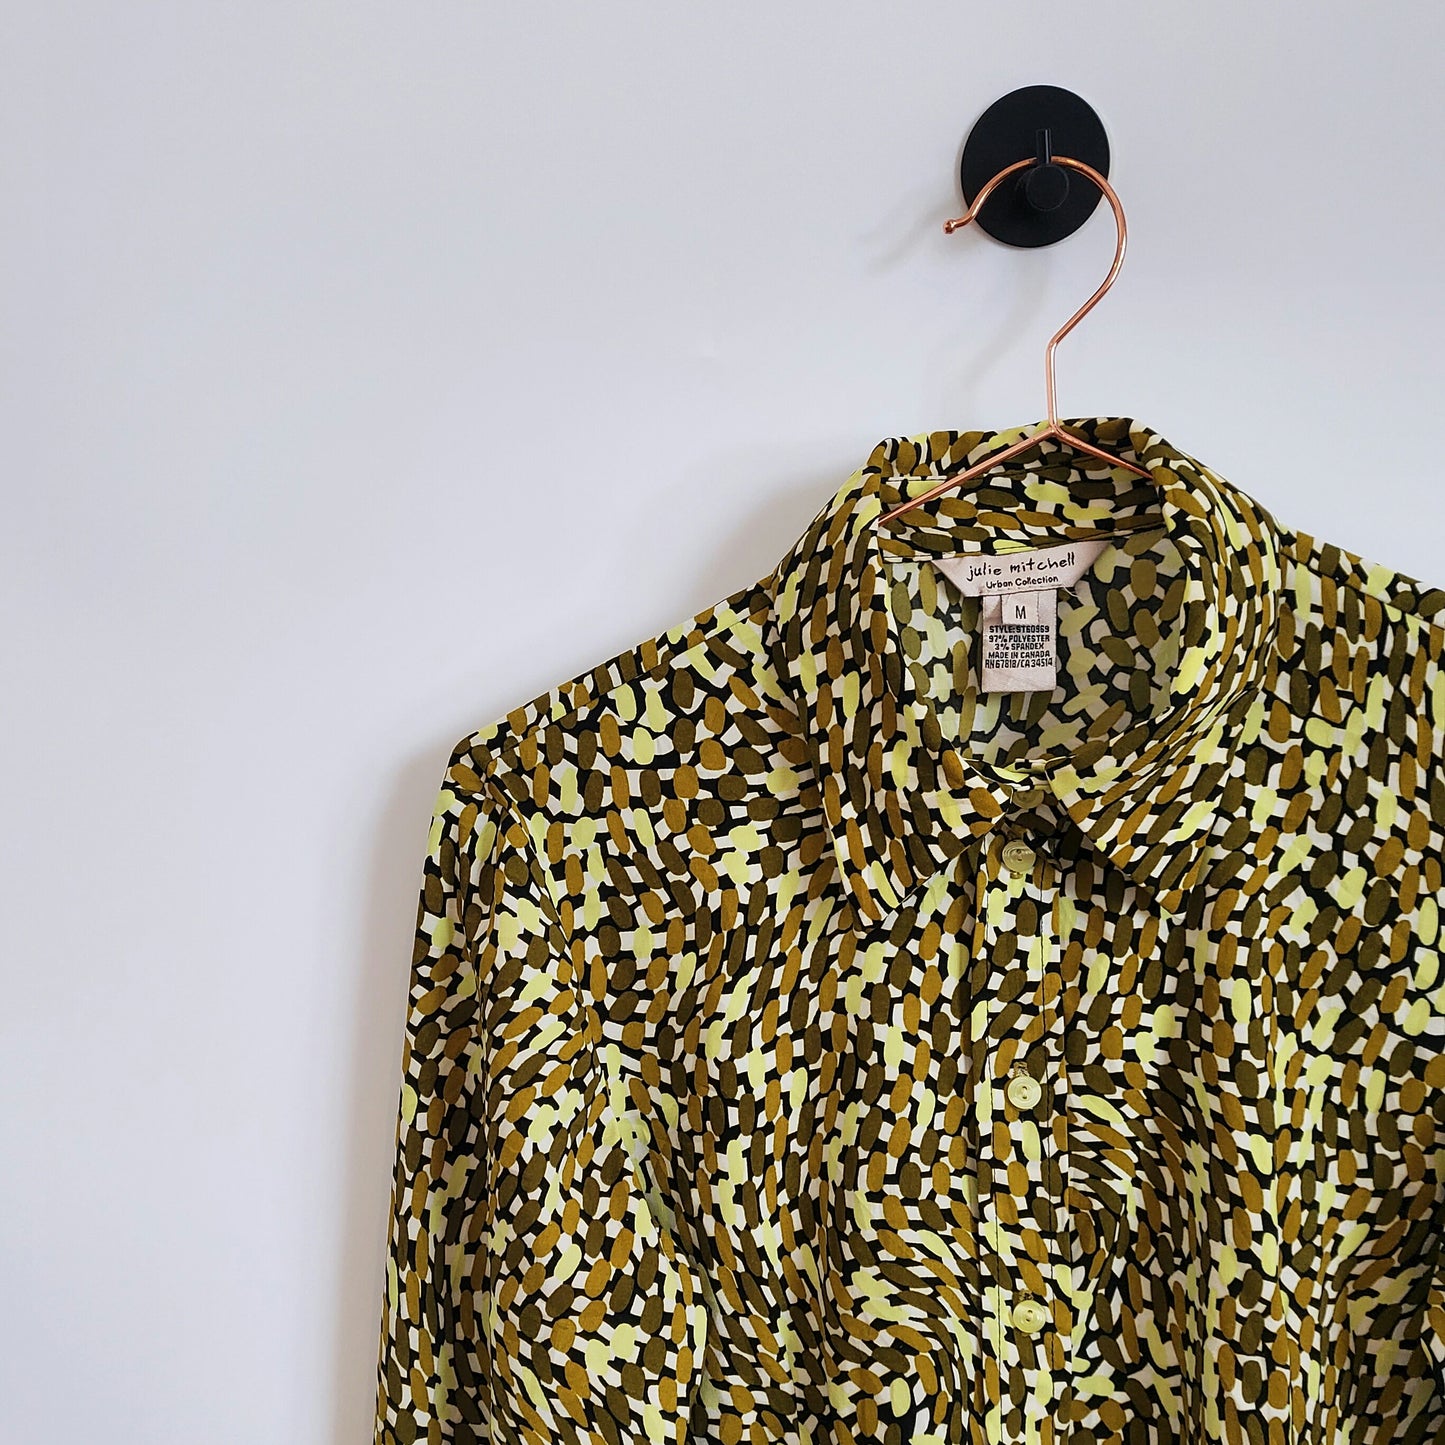 Vintage 80s Abstract Print Blouse | Size M